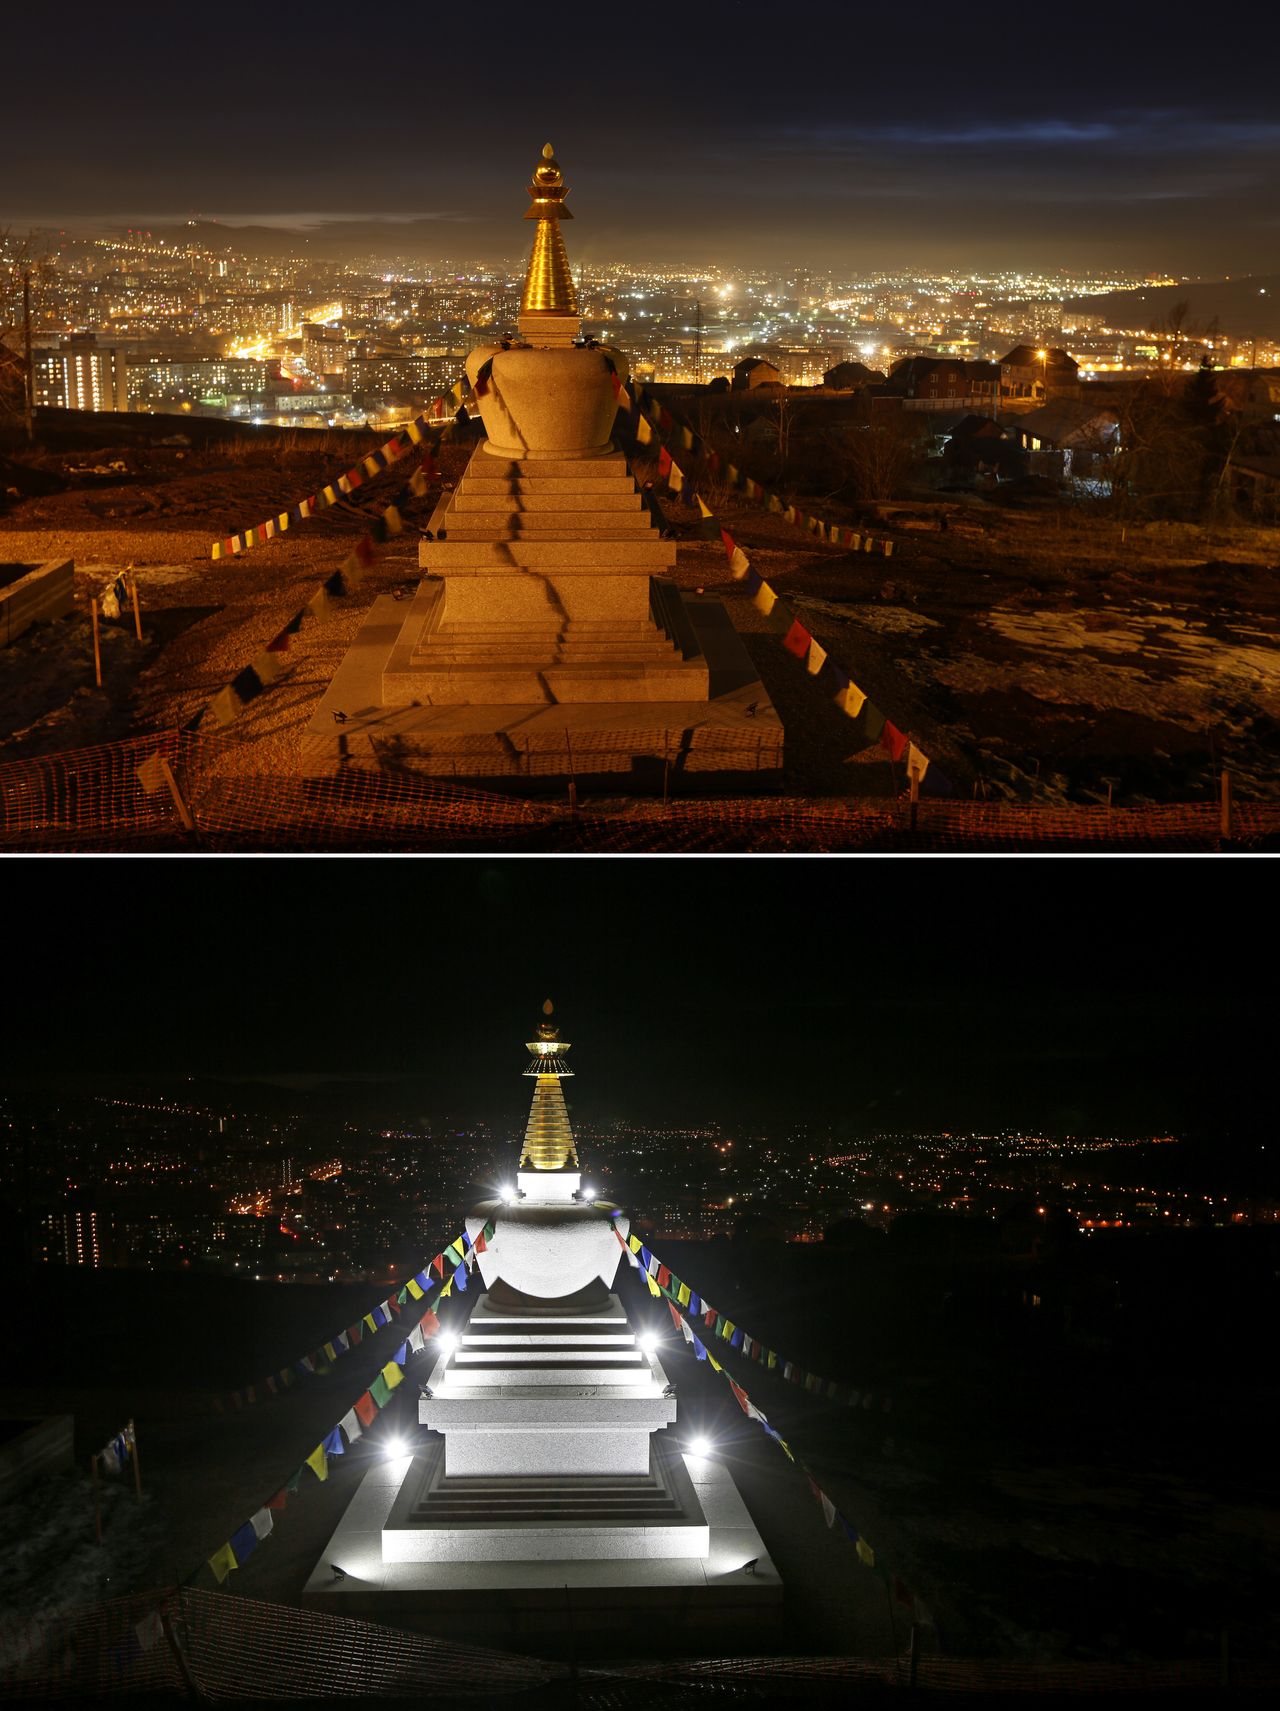 The Stupa of Enlightenment, a holy monument constructed of granite at the Buddhist Center in Krasnoyarsk, during Earth Hour (top) and before.